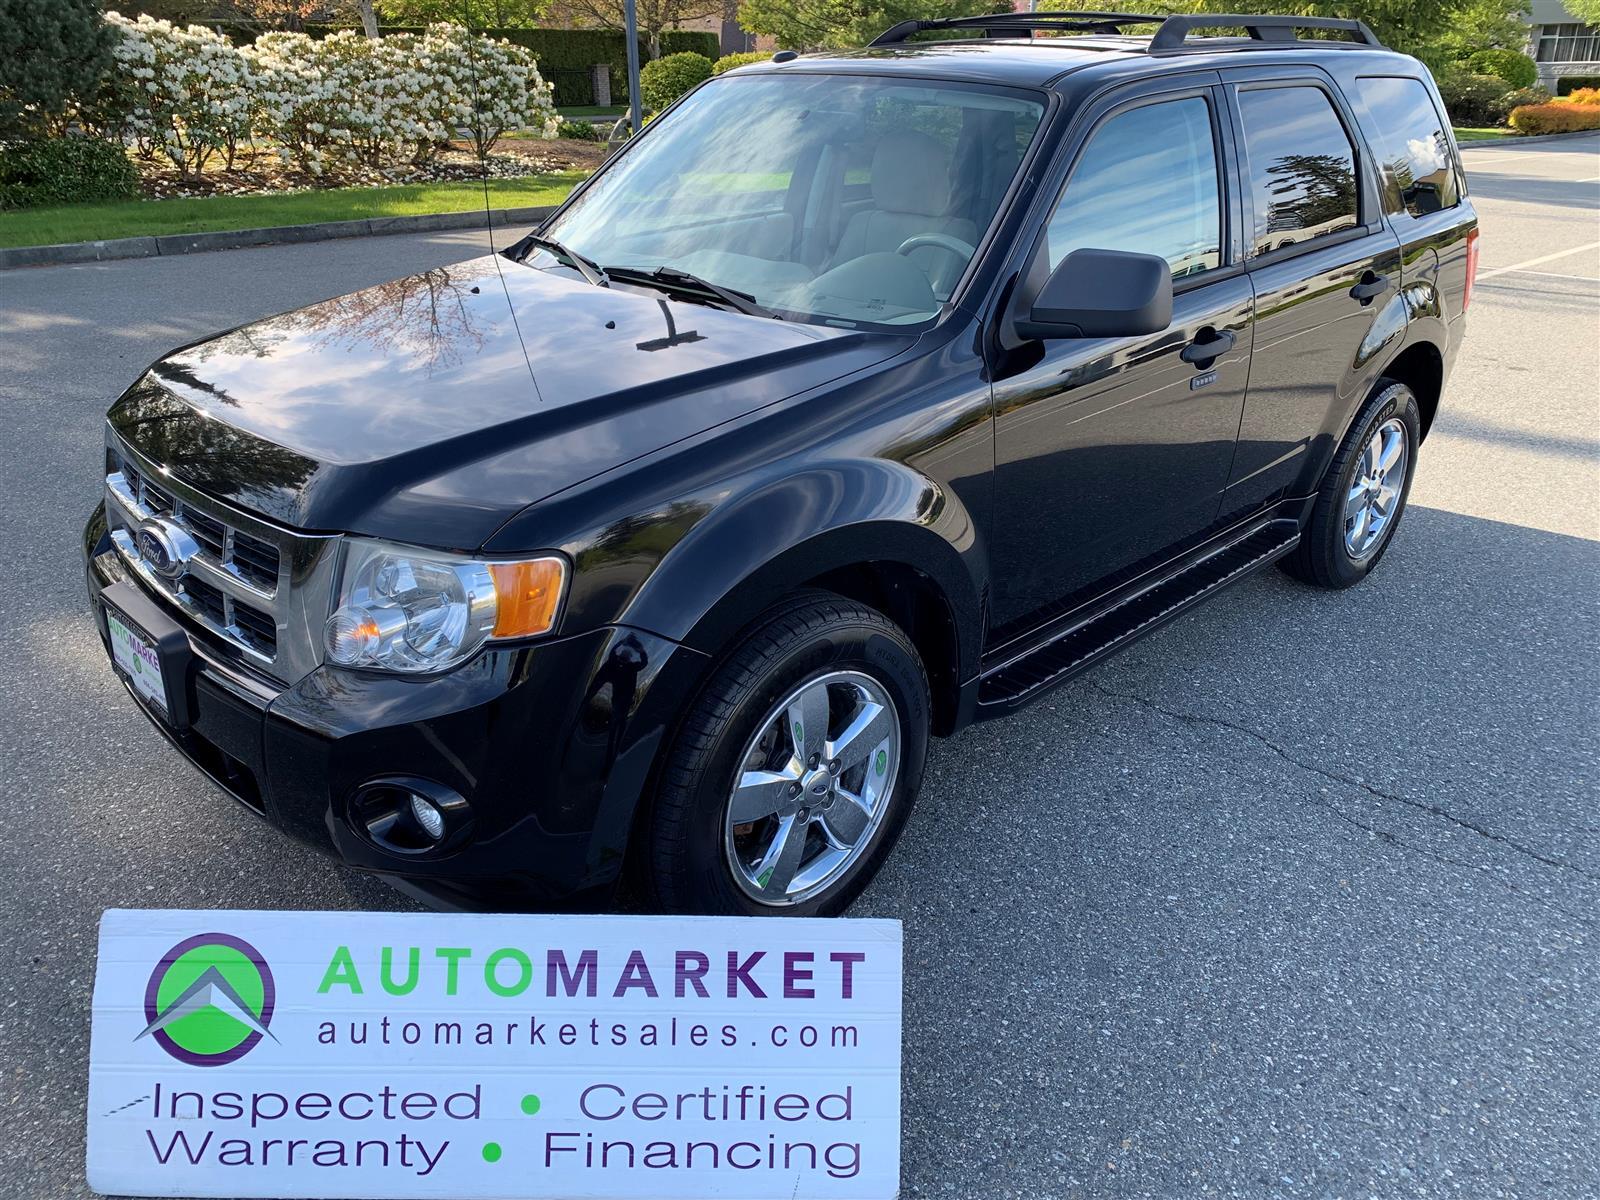 2010 Ford Escape XLT 4WD LTR SUNROOF FINANCING, WARRANTY, INSPECTED